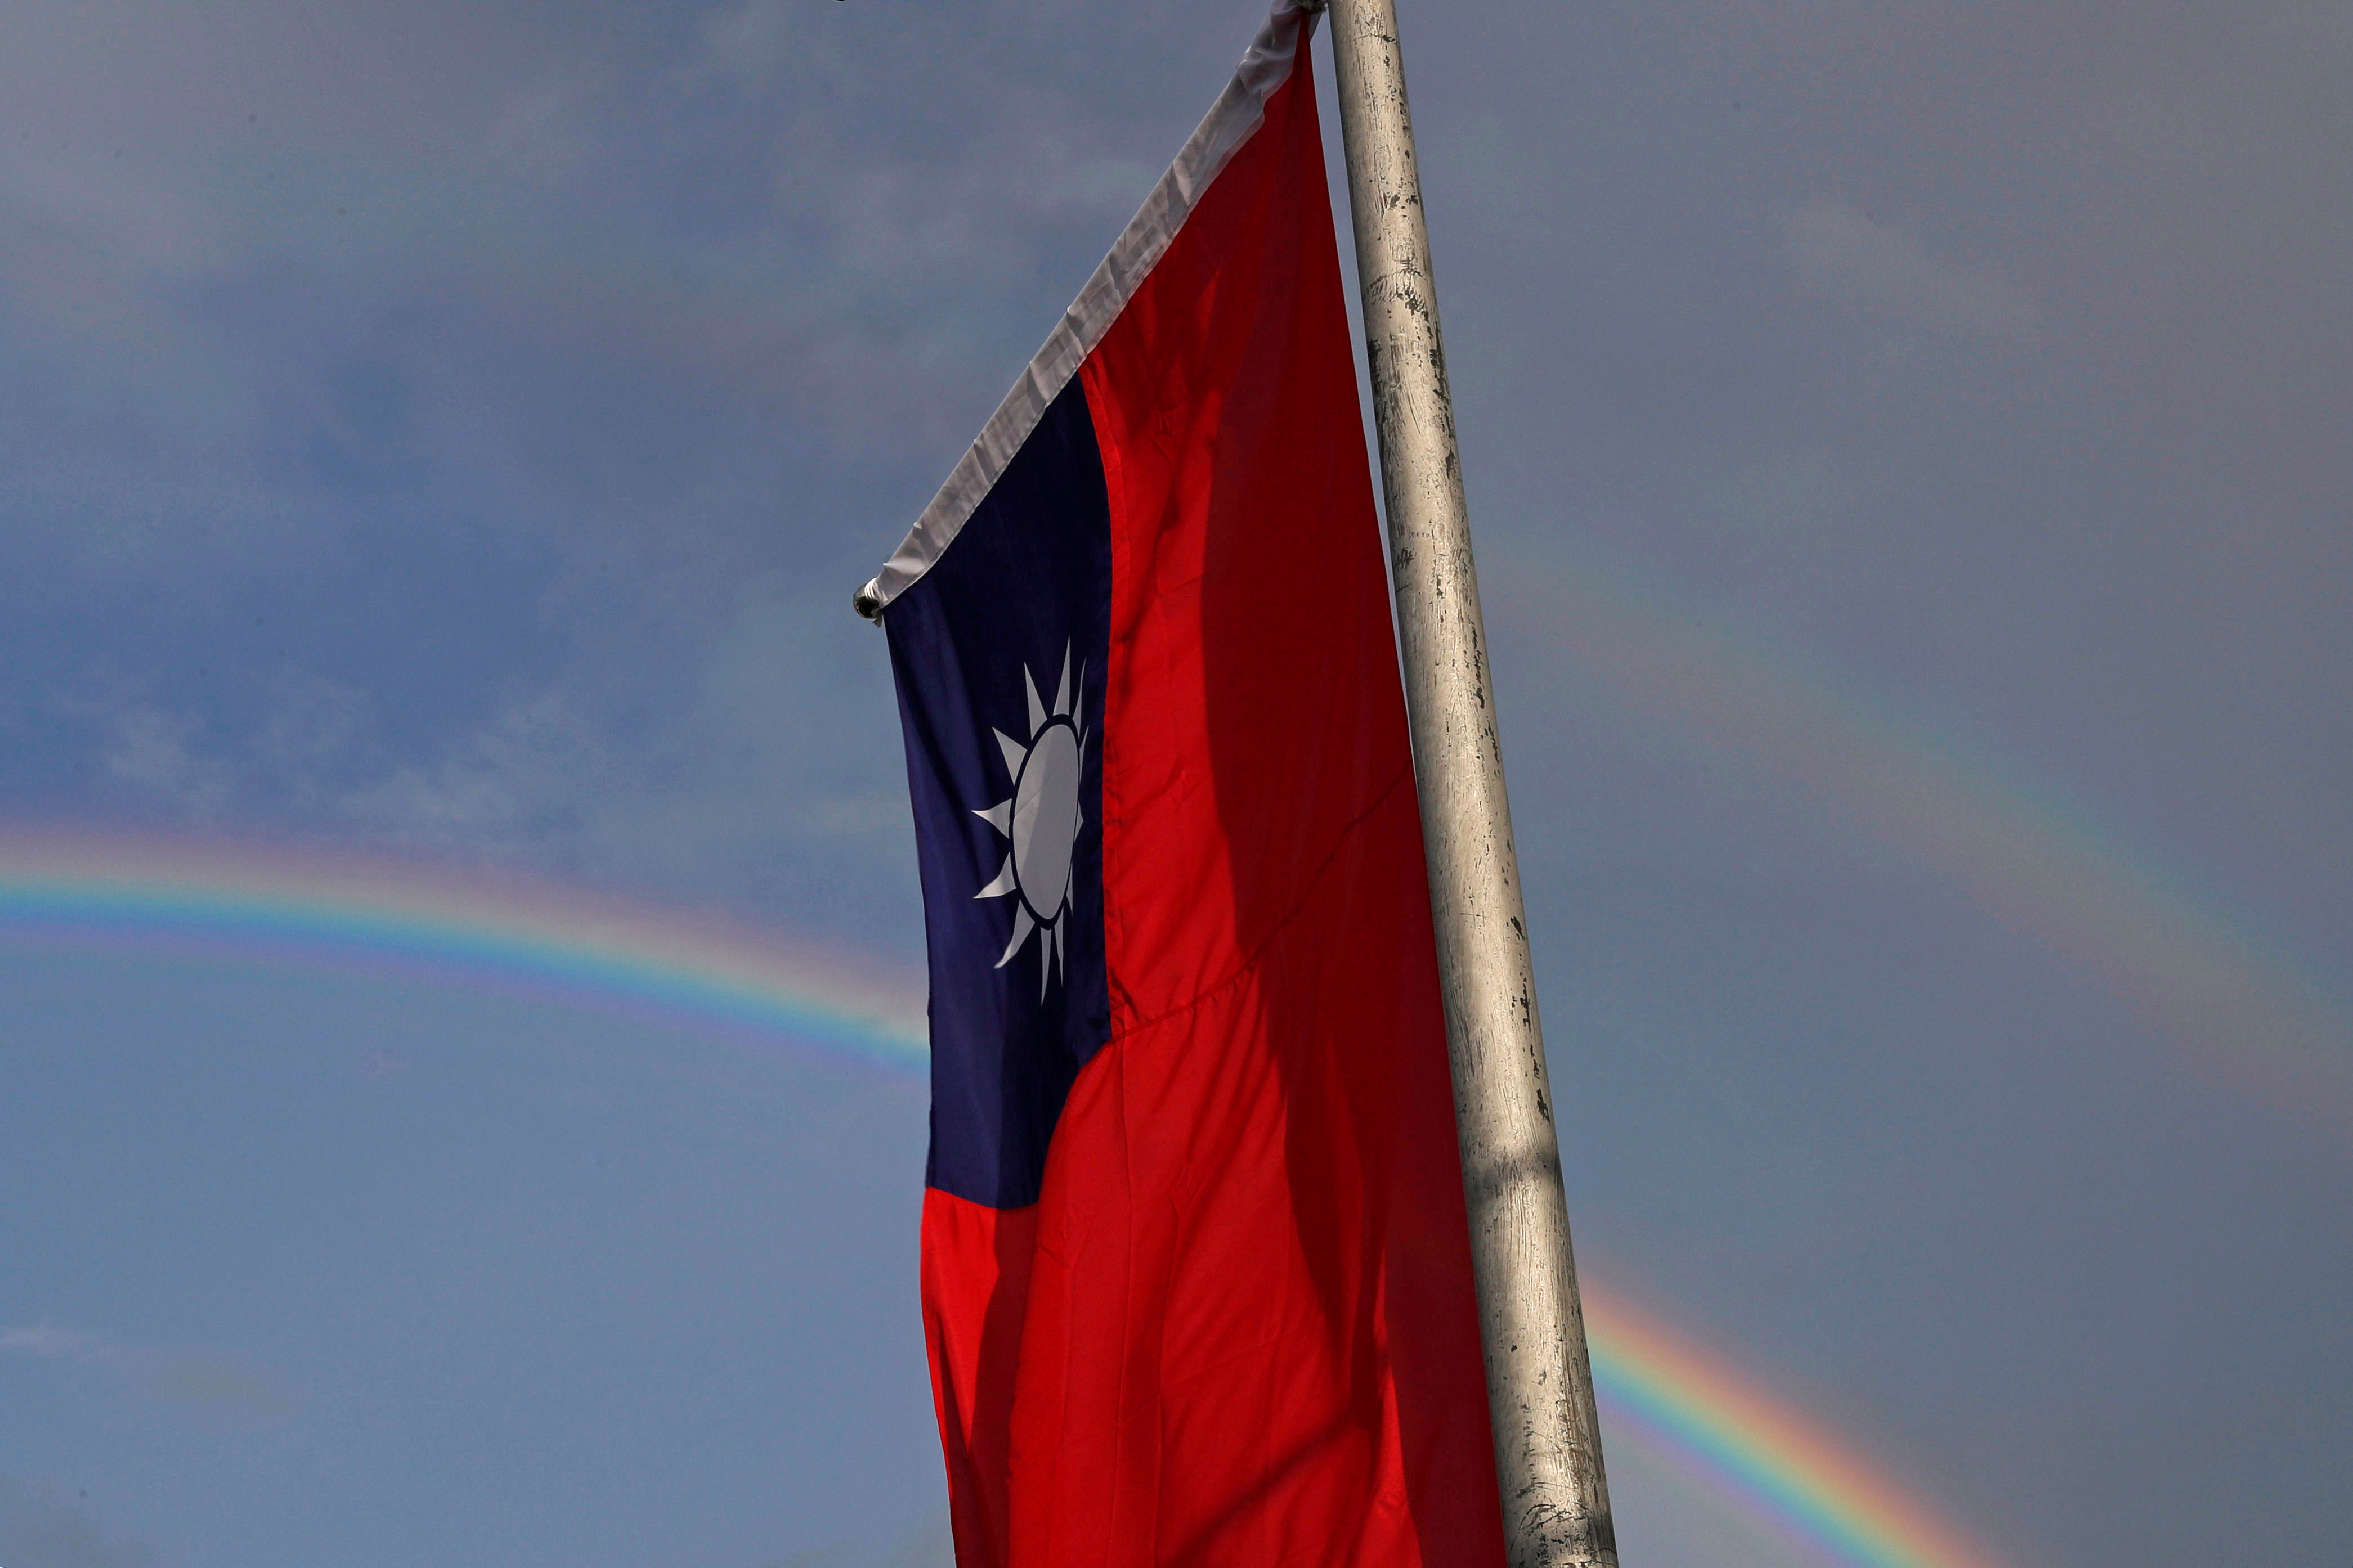 A double rainbow is seen behind Taiwanese flag during the National Day celebrations in Taipei, Taiwan, October 10, 2017. REUTERS/Tyrone Siu